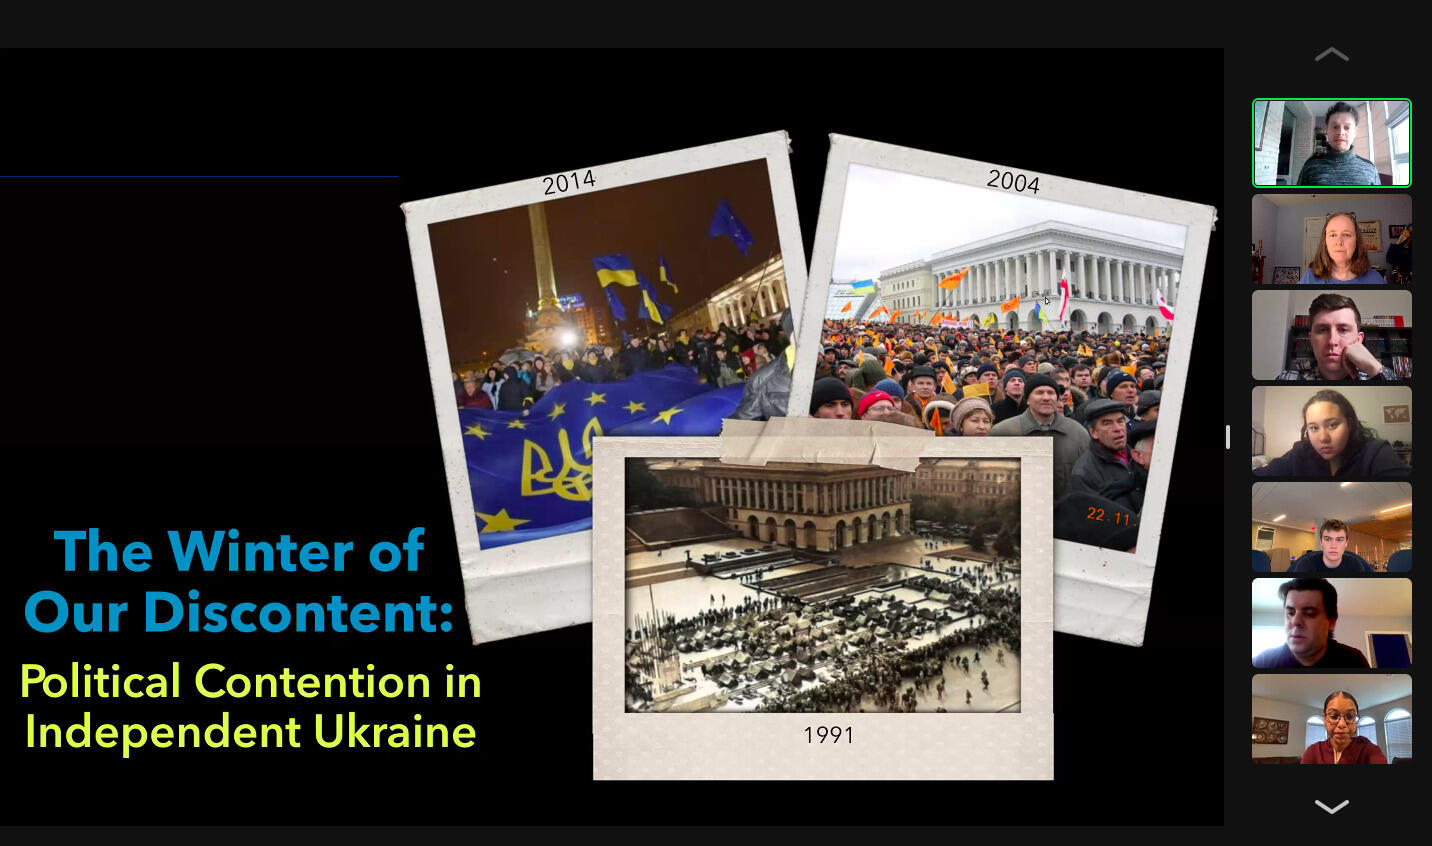 On the far left is text that reads \"The Winter of Our Discontent: Political Contention in Independent Ukraine\" To the right of the text are three photos and then a row of students 